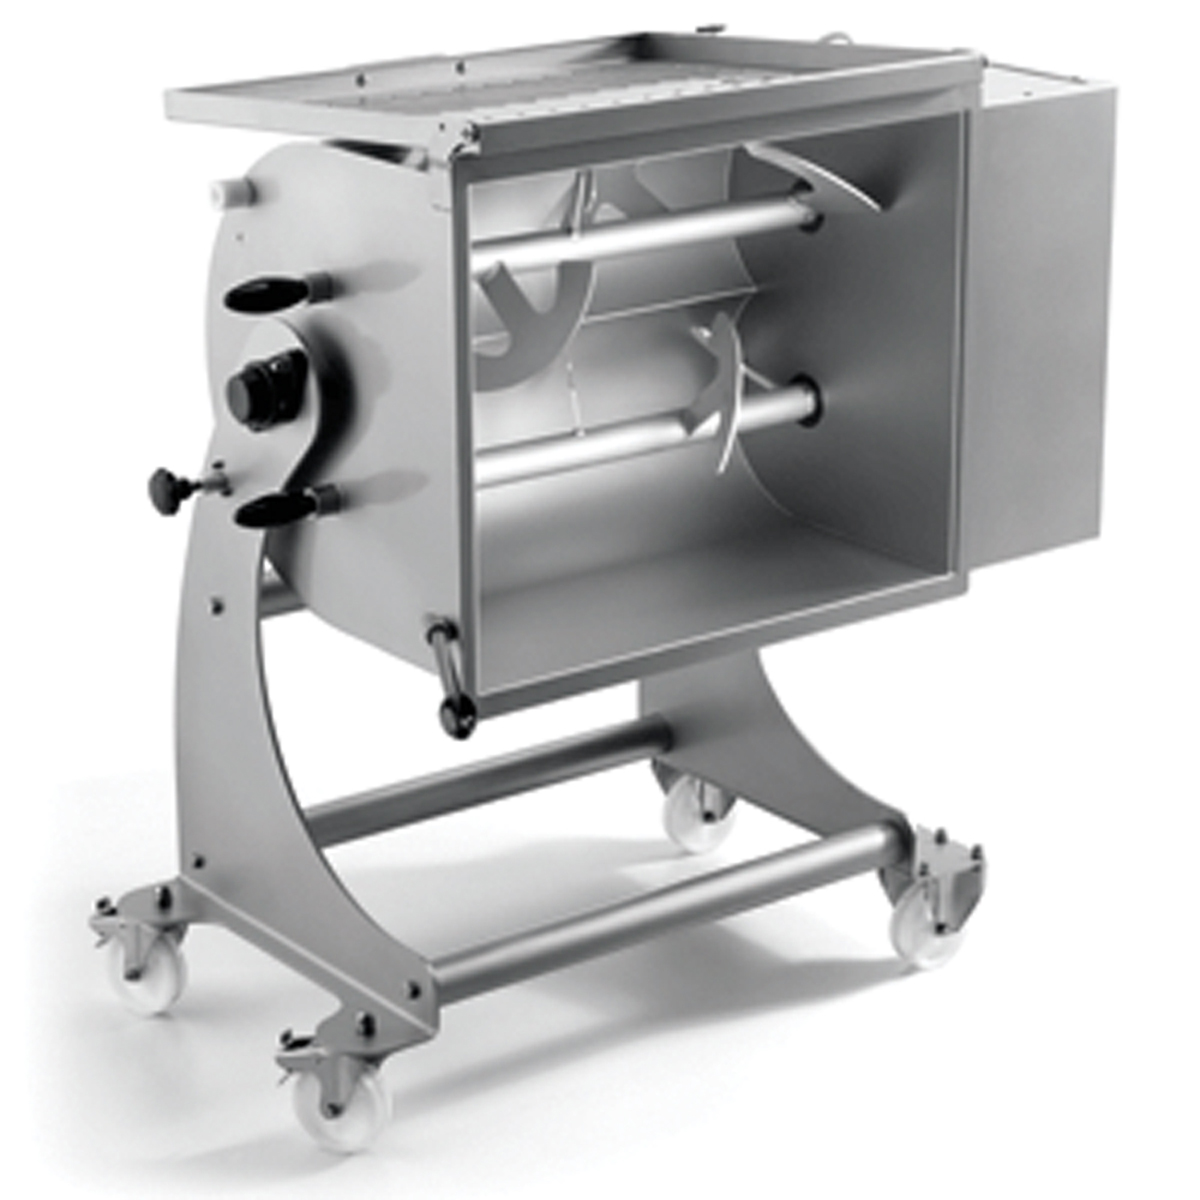 Omcan 37451 Dual Paddle Tilting Meat Mixer 220V, 3 Phase, 120-Kg Capacity image 1